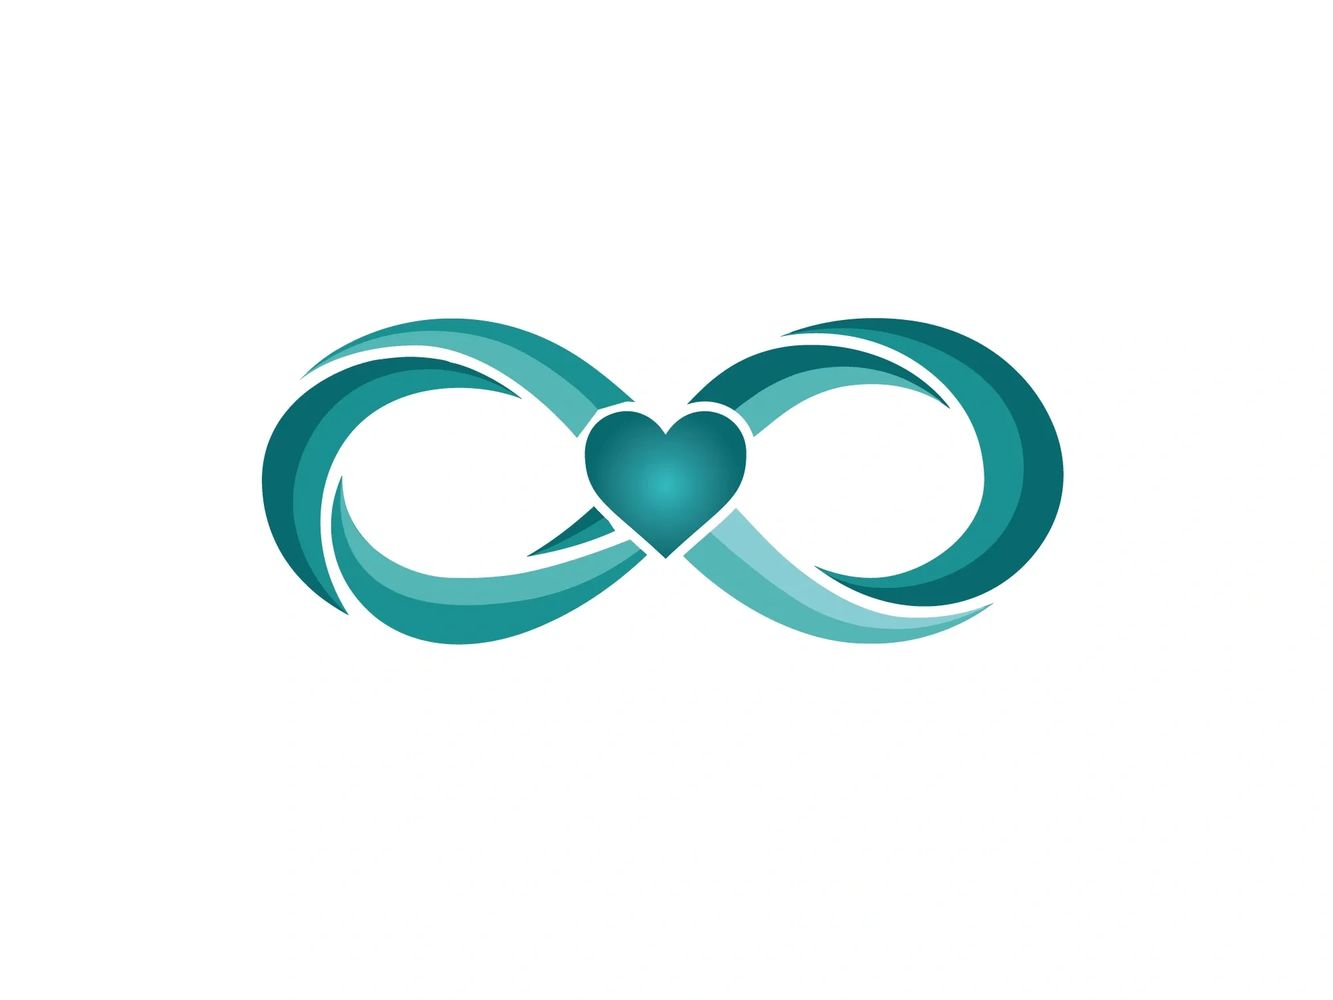 Infinity symbol for elite home care services 